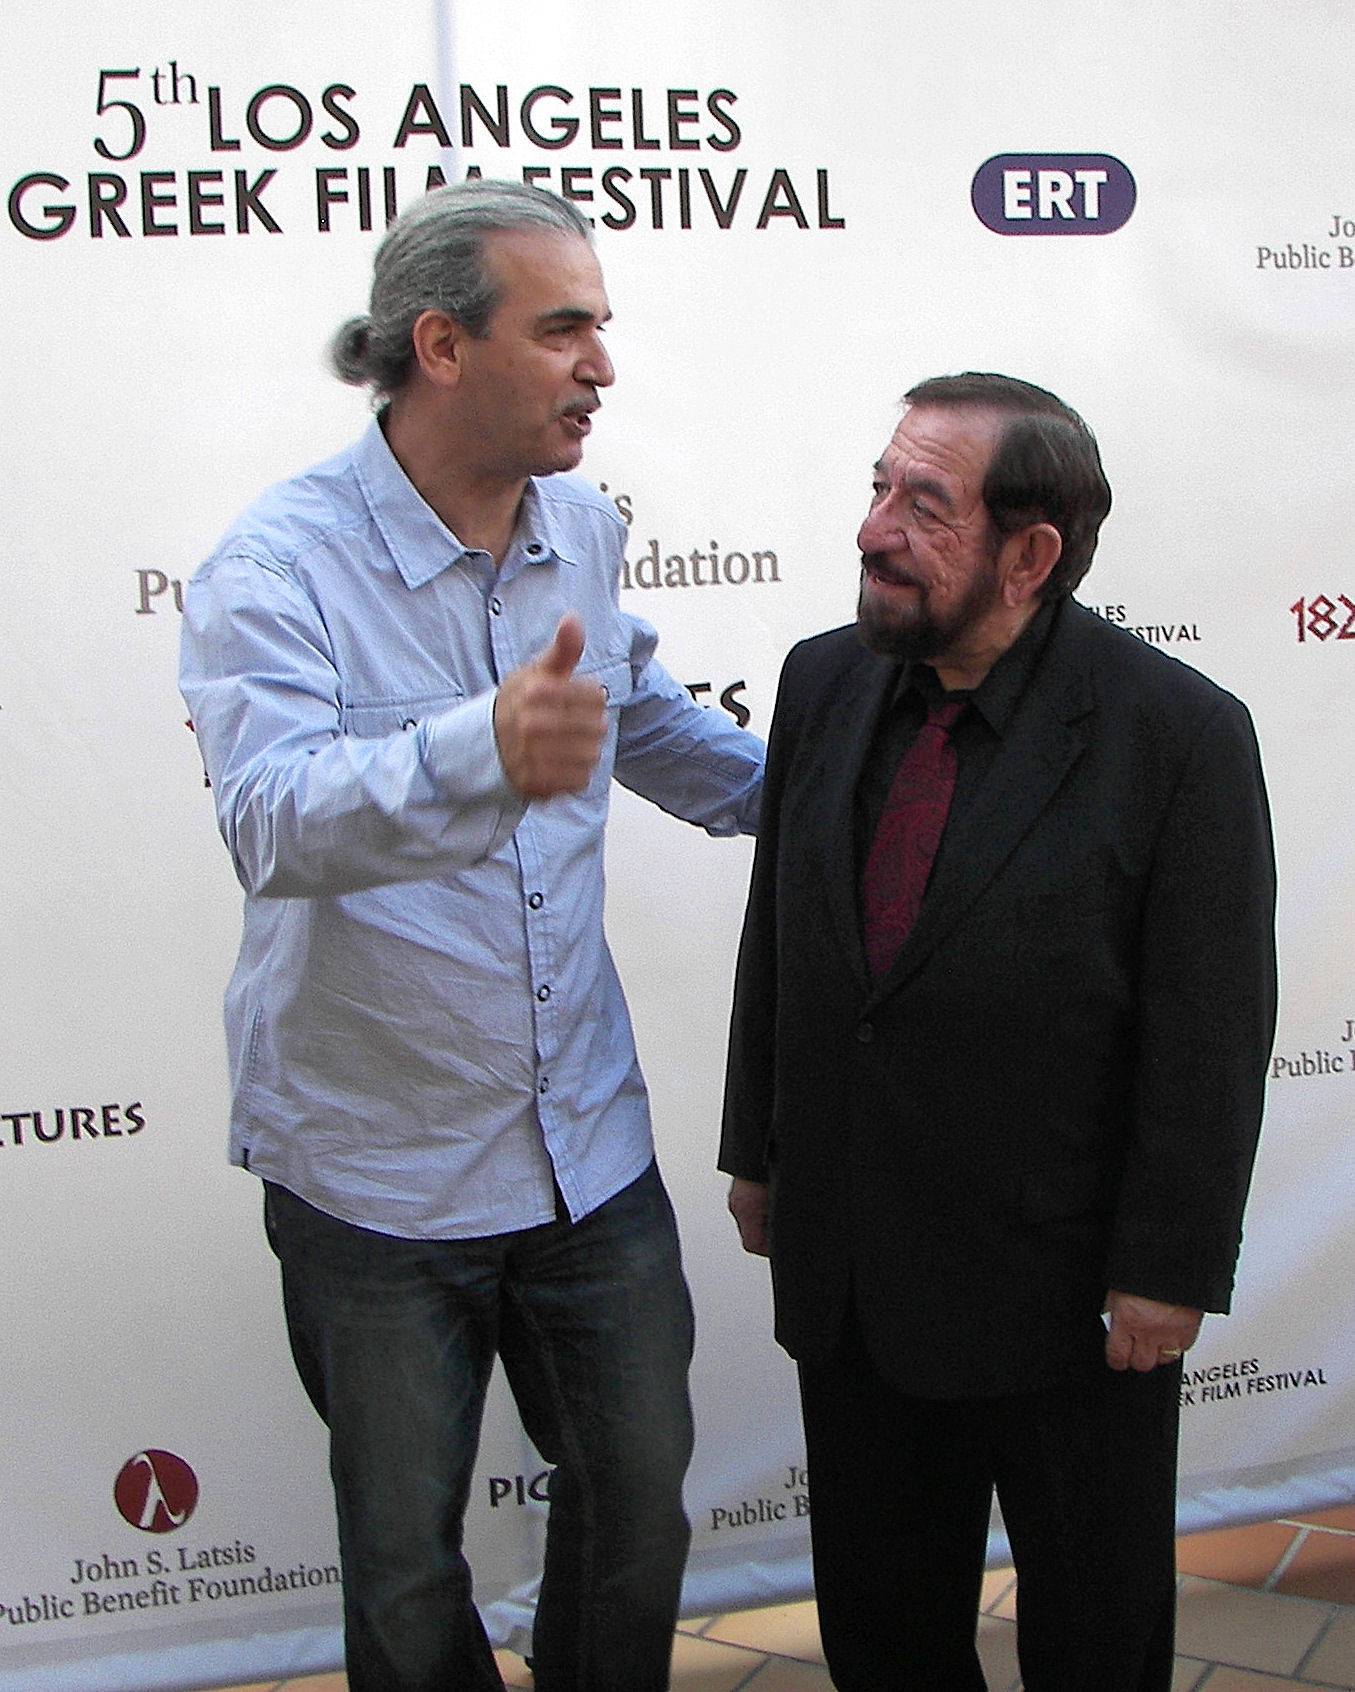 Jesse with Director, Nick Gaitatjis at Without Borders movie premiere and film festival. June 11, 2011